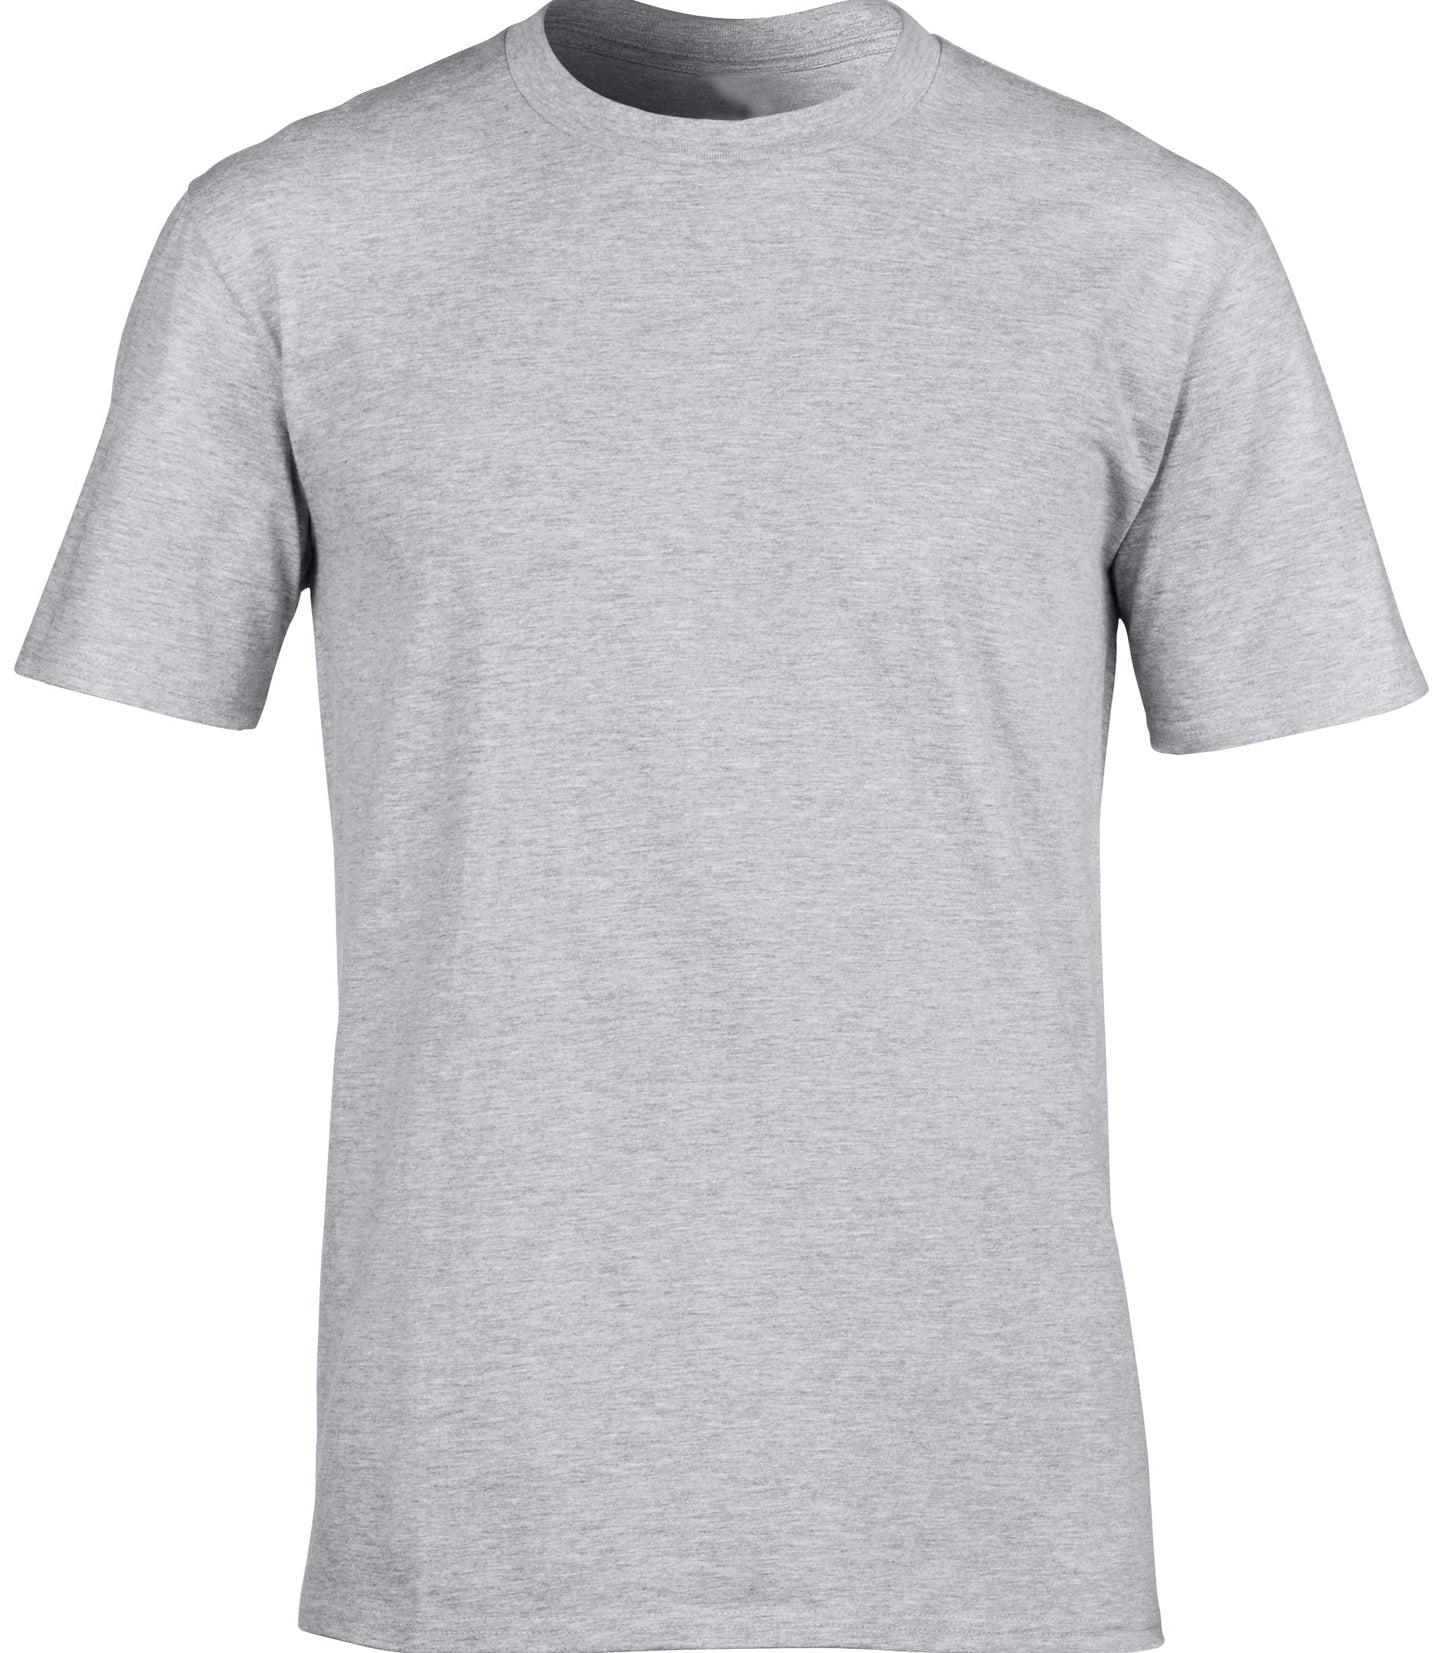 Just Text Workwear Unisex T-shirt Save £3 per item when ordering 5 or more!